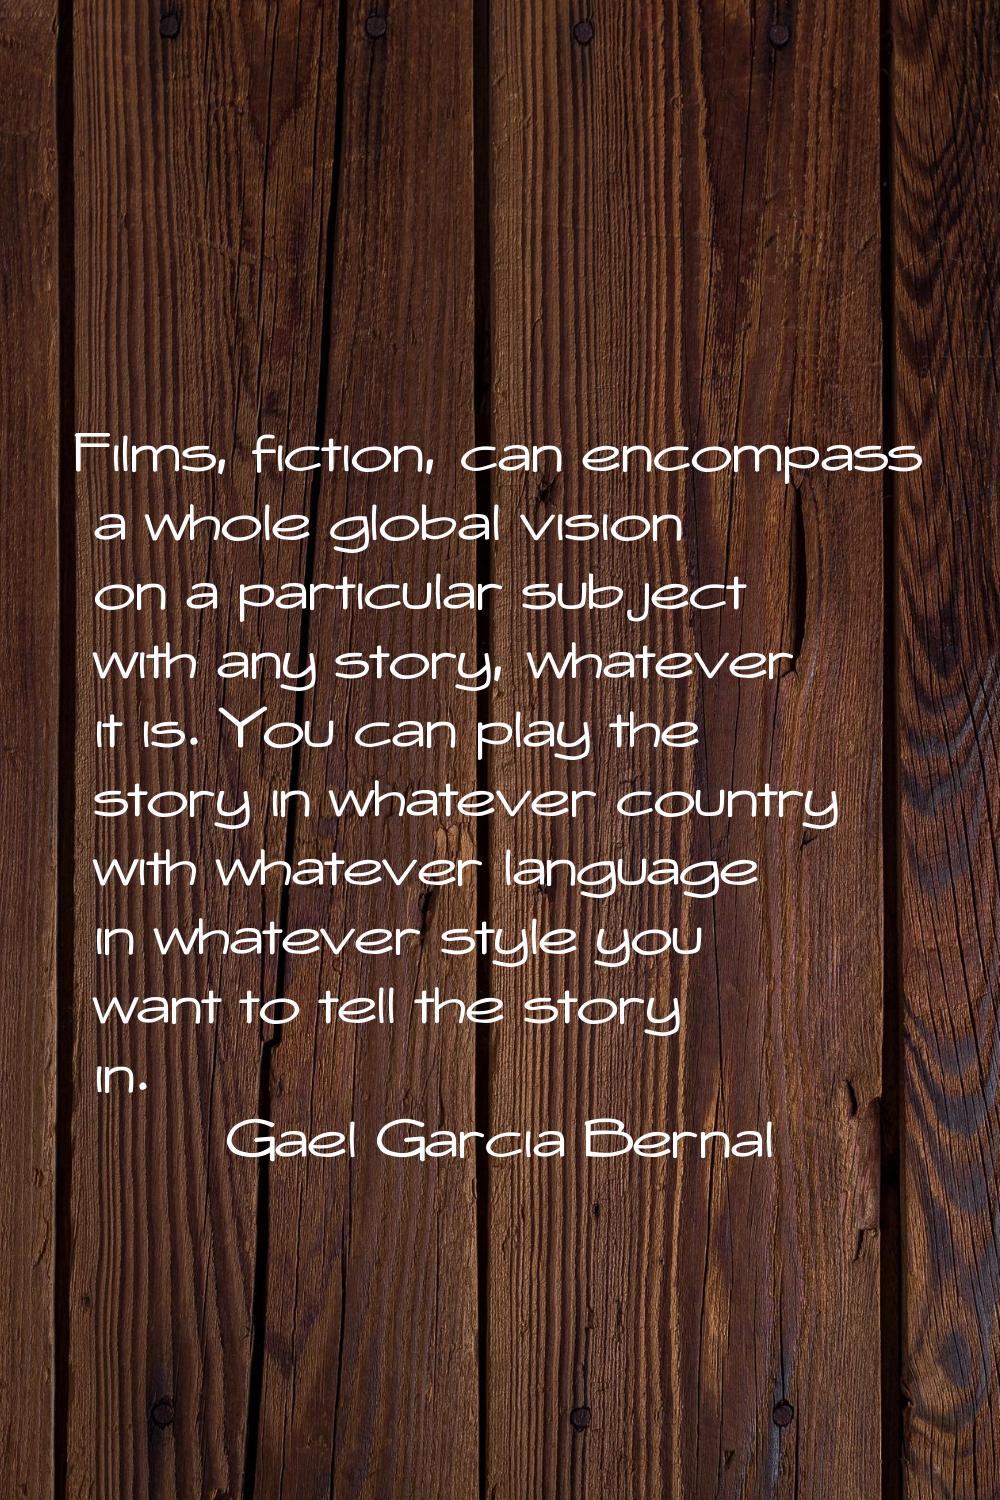 Films, fiction, can encompass a whole global vision on a particular subject with any story, whateve